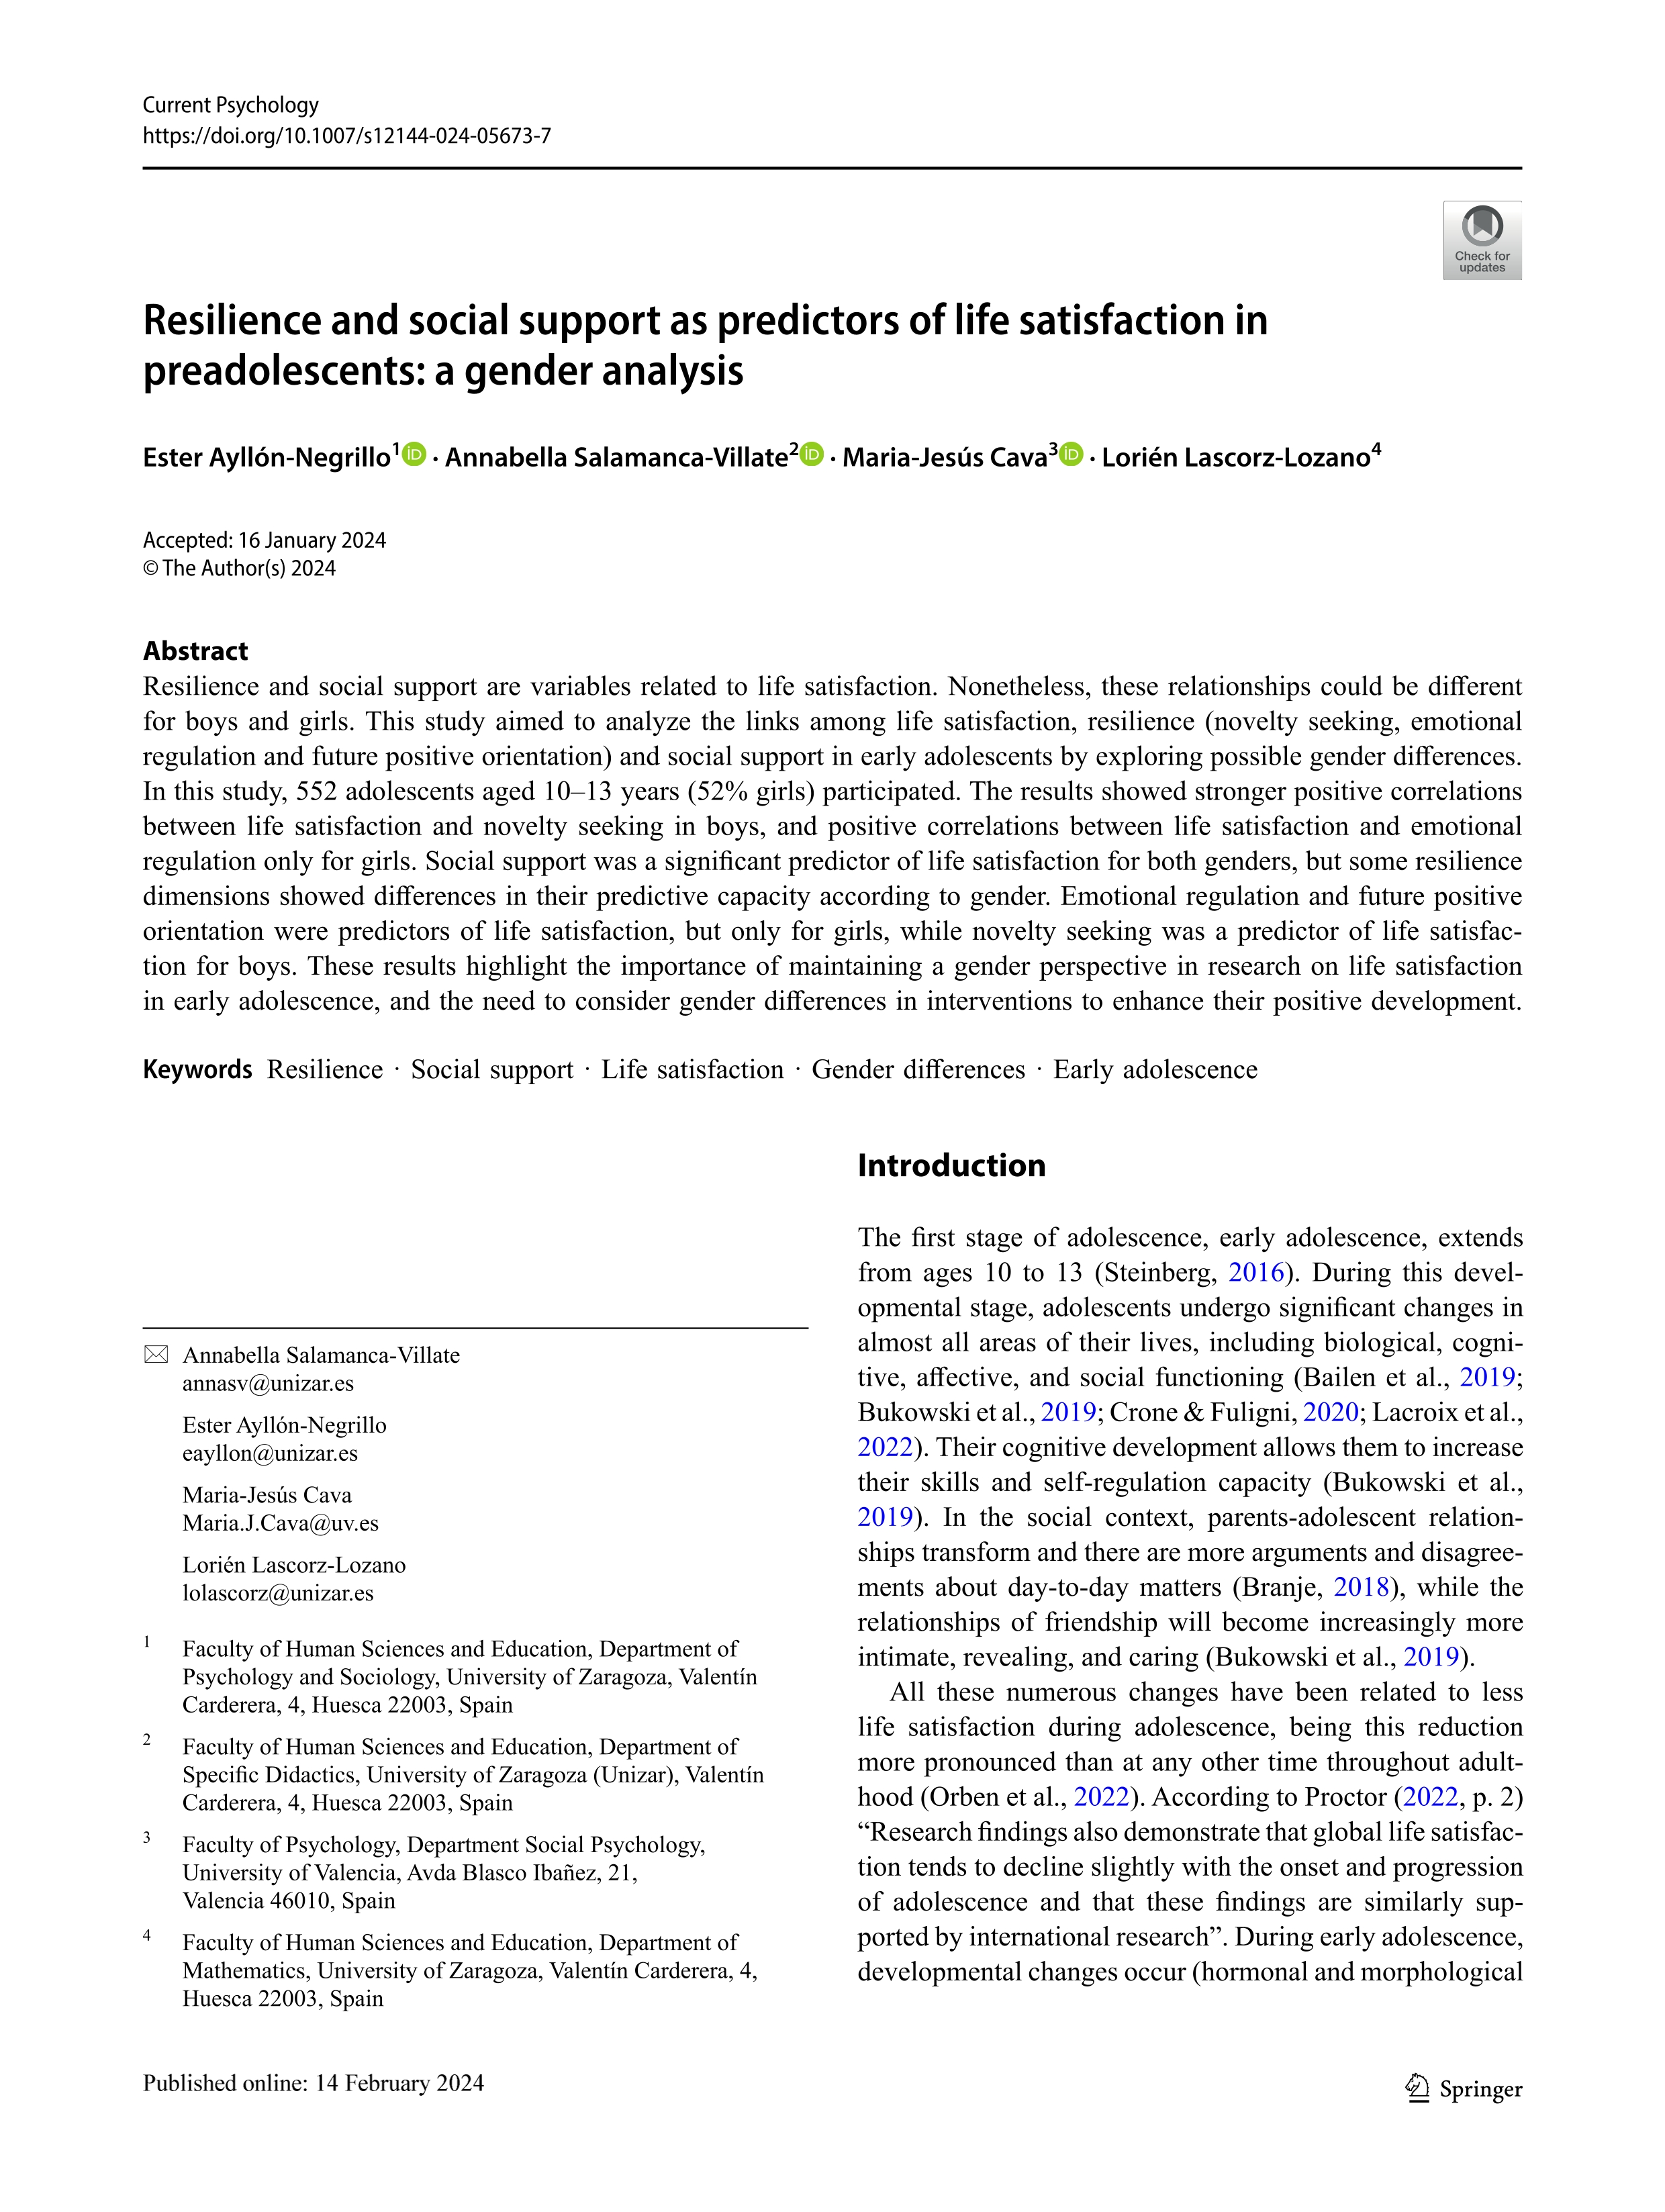 Resilience and social support as predictors of life satisfaction in preadolescents: a gender analysis